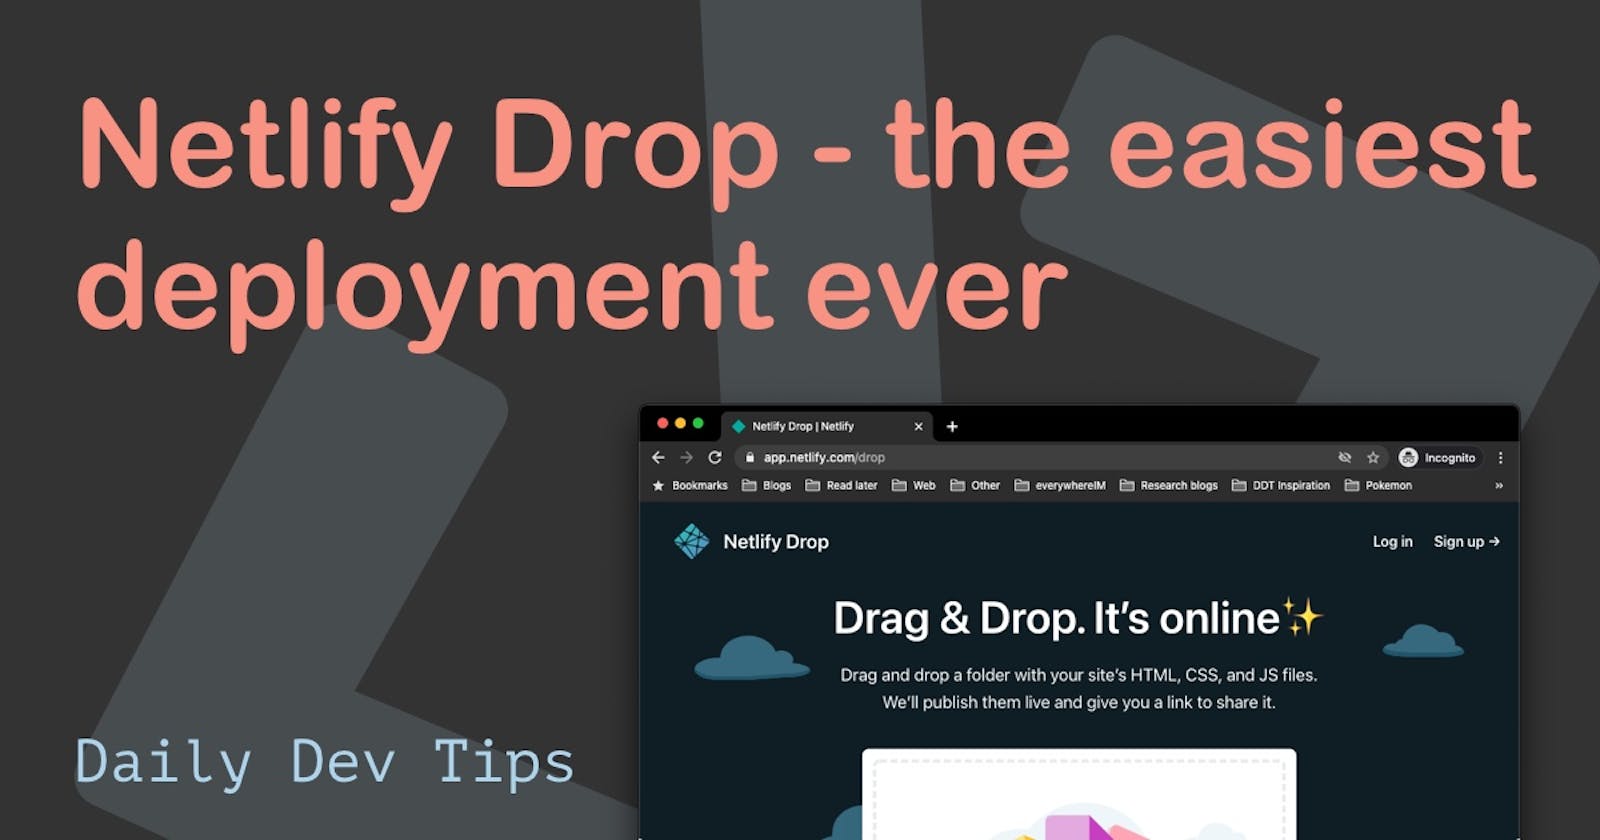 Netlify Drop - the easiest deployment ever